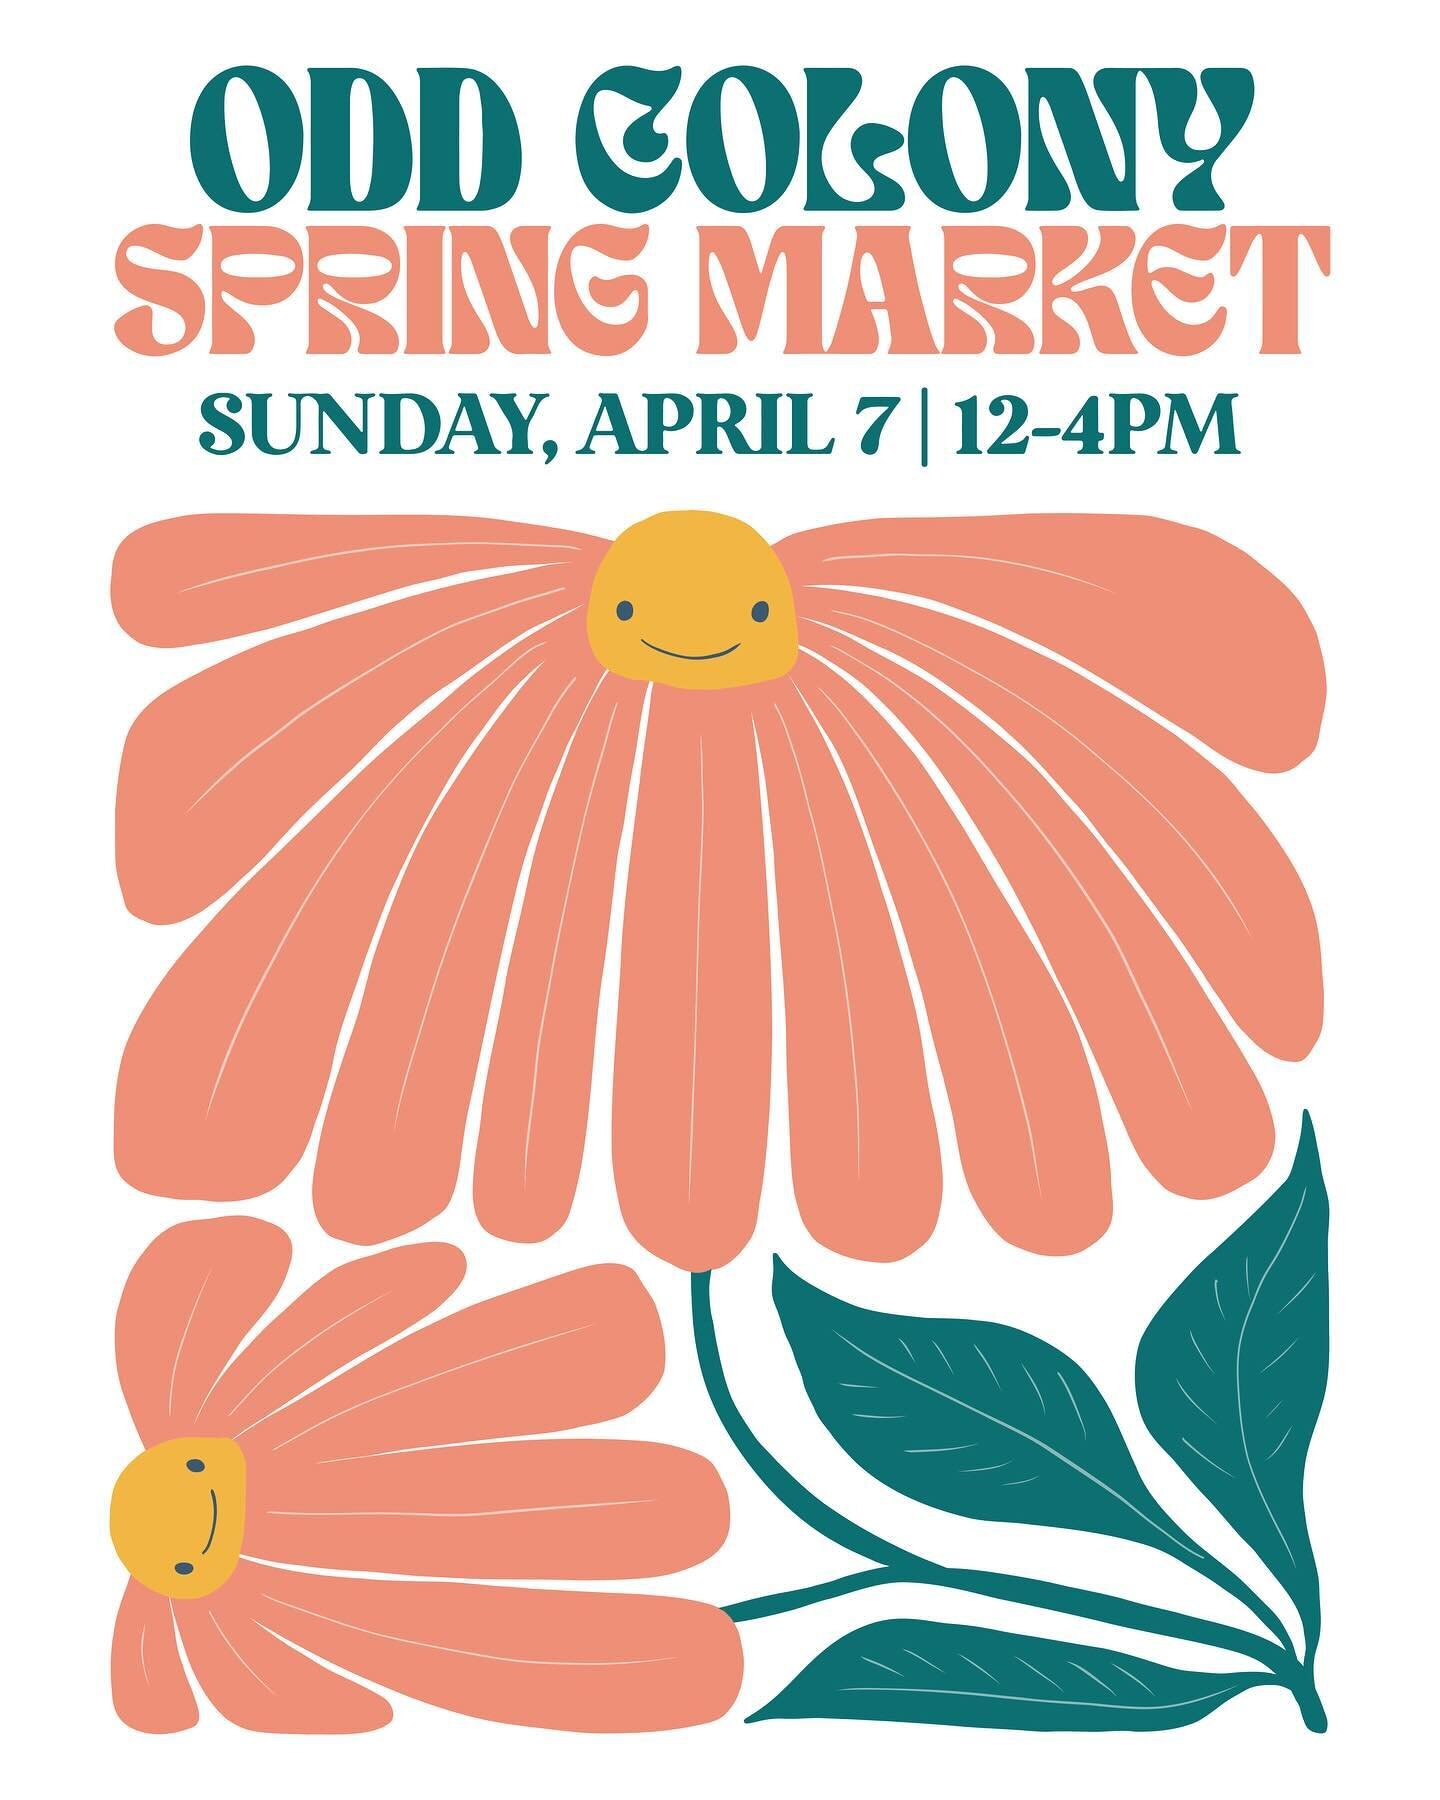 💐 Today is our 𝐒𝐏𝐑𝐈𝐍𝐆 𝐌𝐀𝐑𝐊𝐄𝐓! 💐Usher in the season and celebrate this beautiful day by coming by to support these extraordinary makers, artists &amp; curators! 

@laninoel.photo ~ free Photo Booth
@saucebossburger 
@sweetjacksontea 
@lo